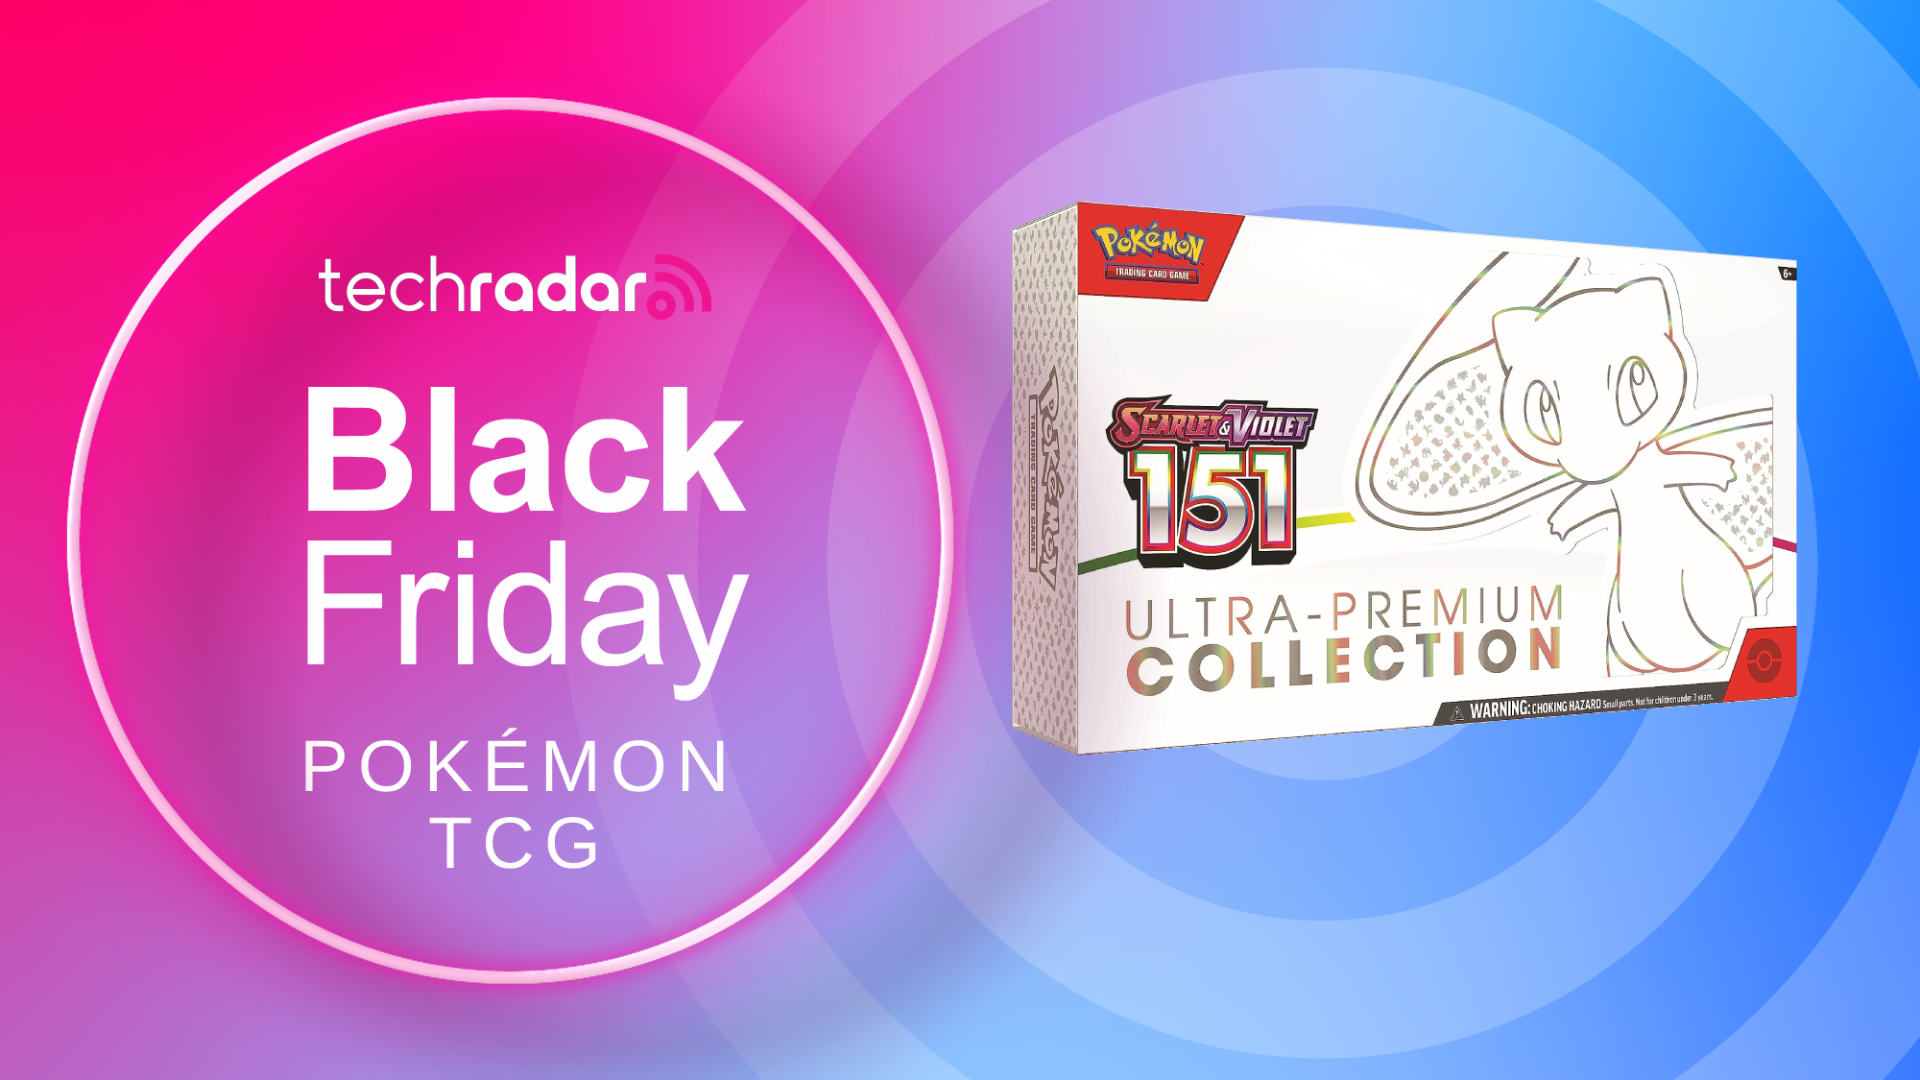 Pre-order the Pokémon Sword and Pokémon Shield Expansion Pass from the  Nintendo Official UK Store and get 50% off selected Pokémon merch!, News